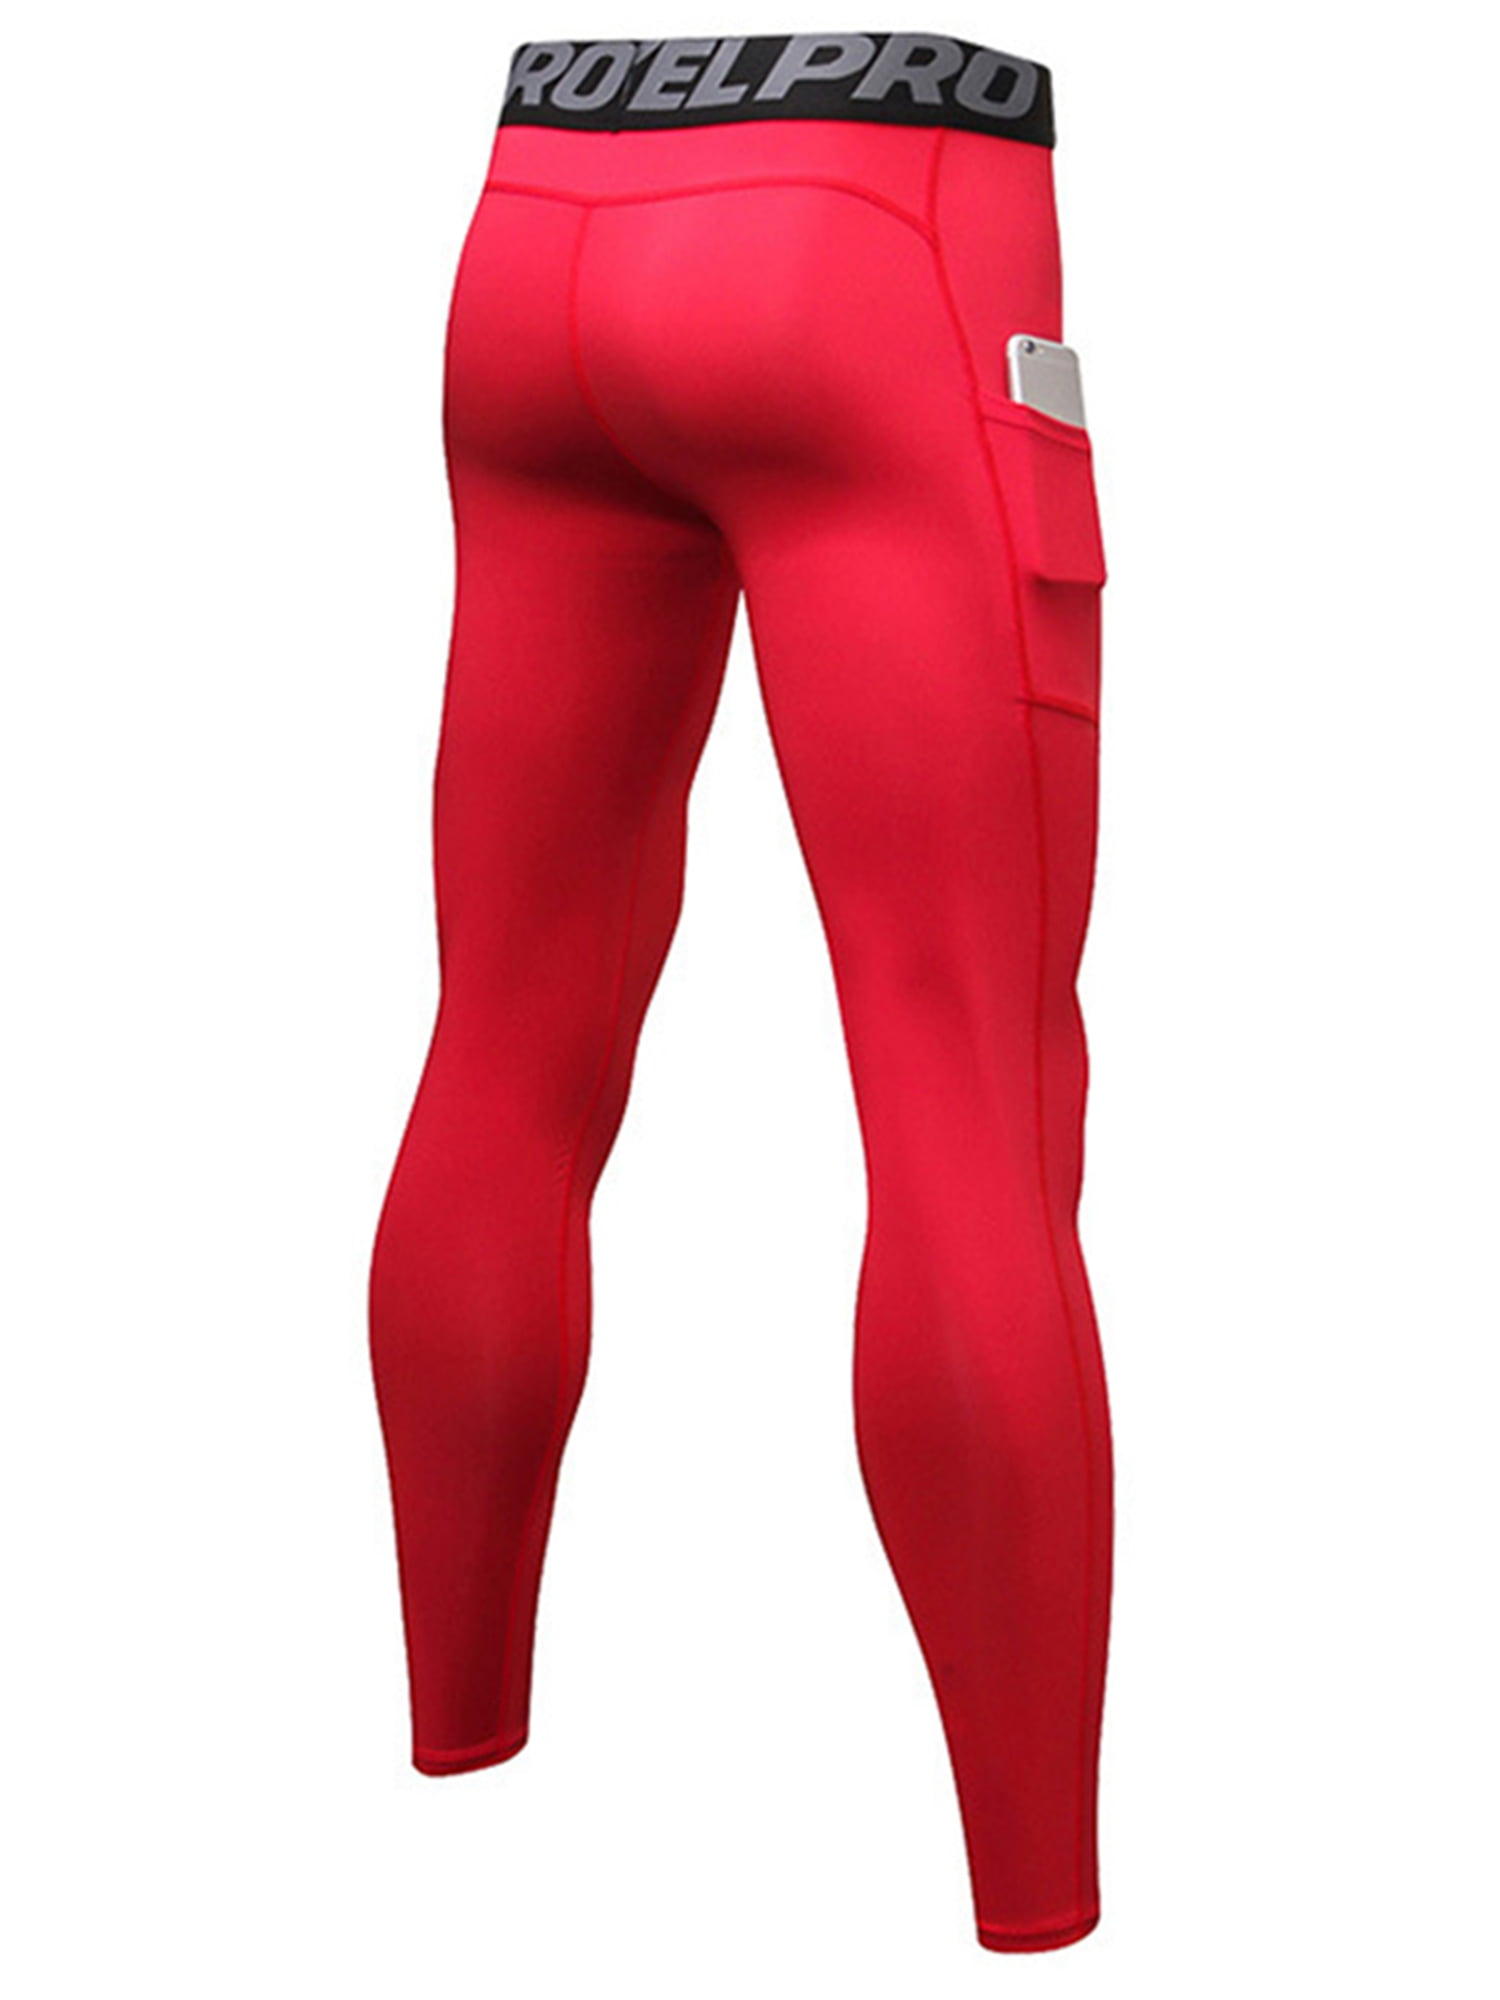 MeetHoo Compression Pants for Men Cool Dry Athletic Leggings Capri Workout Running Tights with Pocket Gym Sport Fitness 